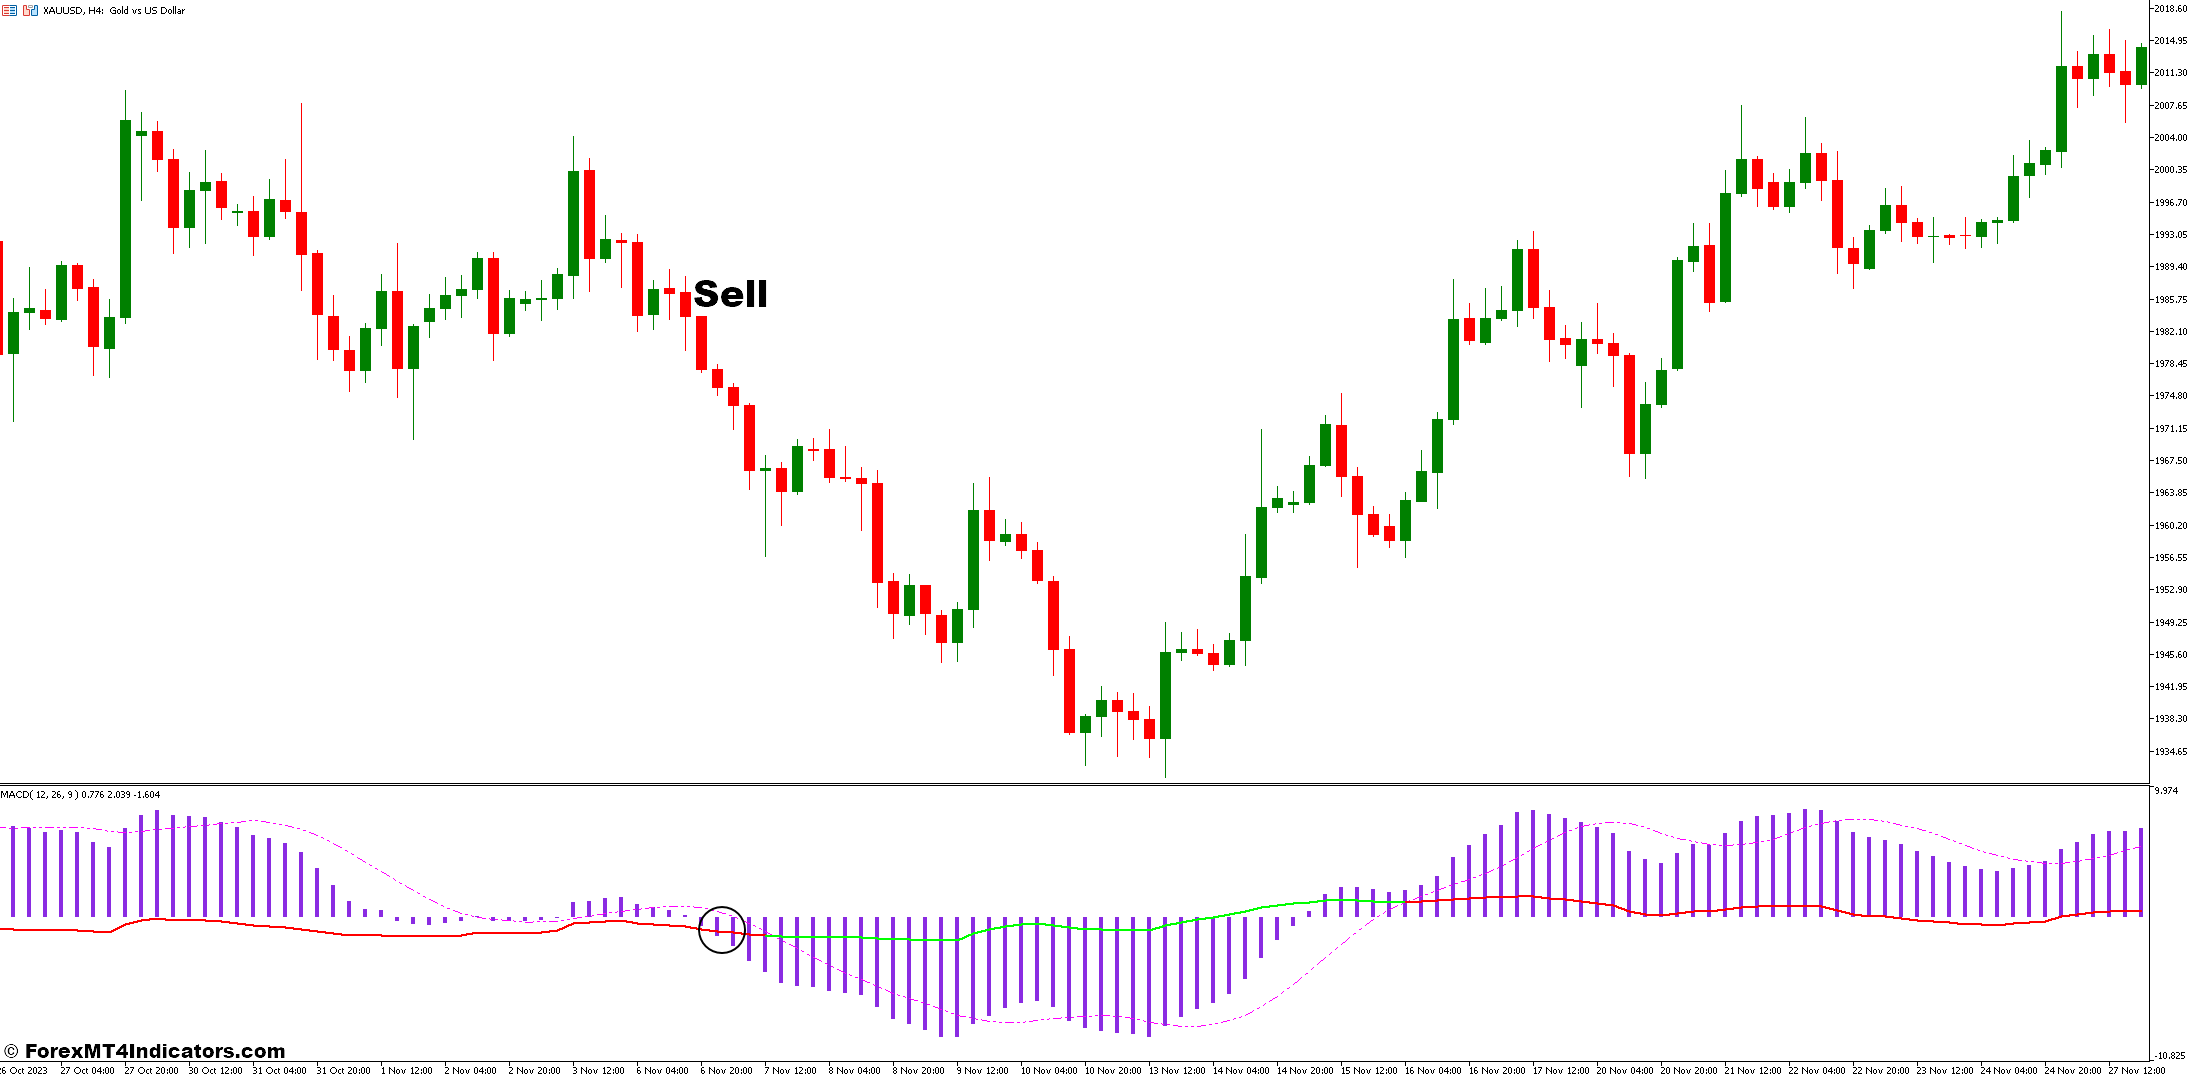 How to Trade with MACD RSI Indicator - Sell Entry